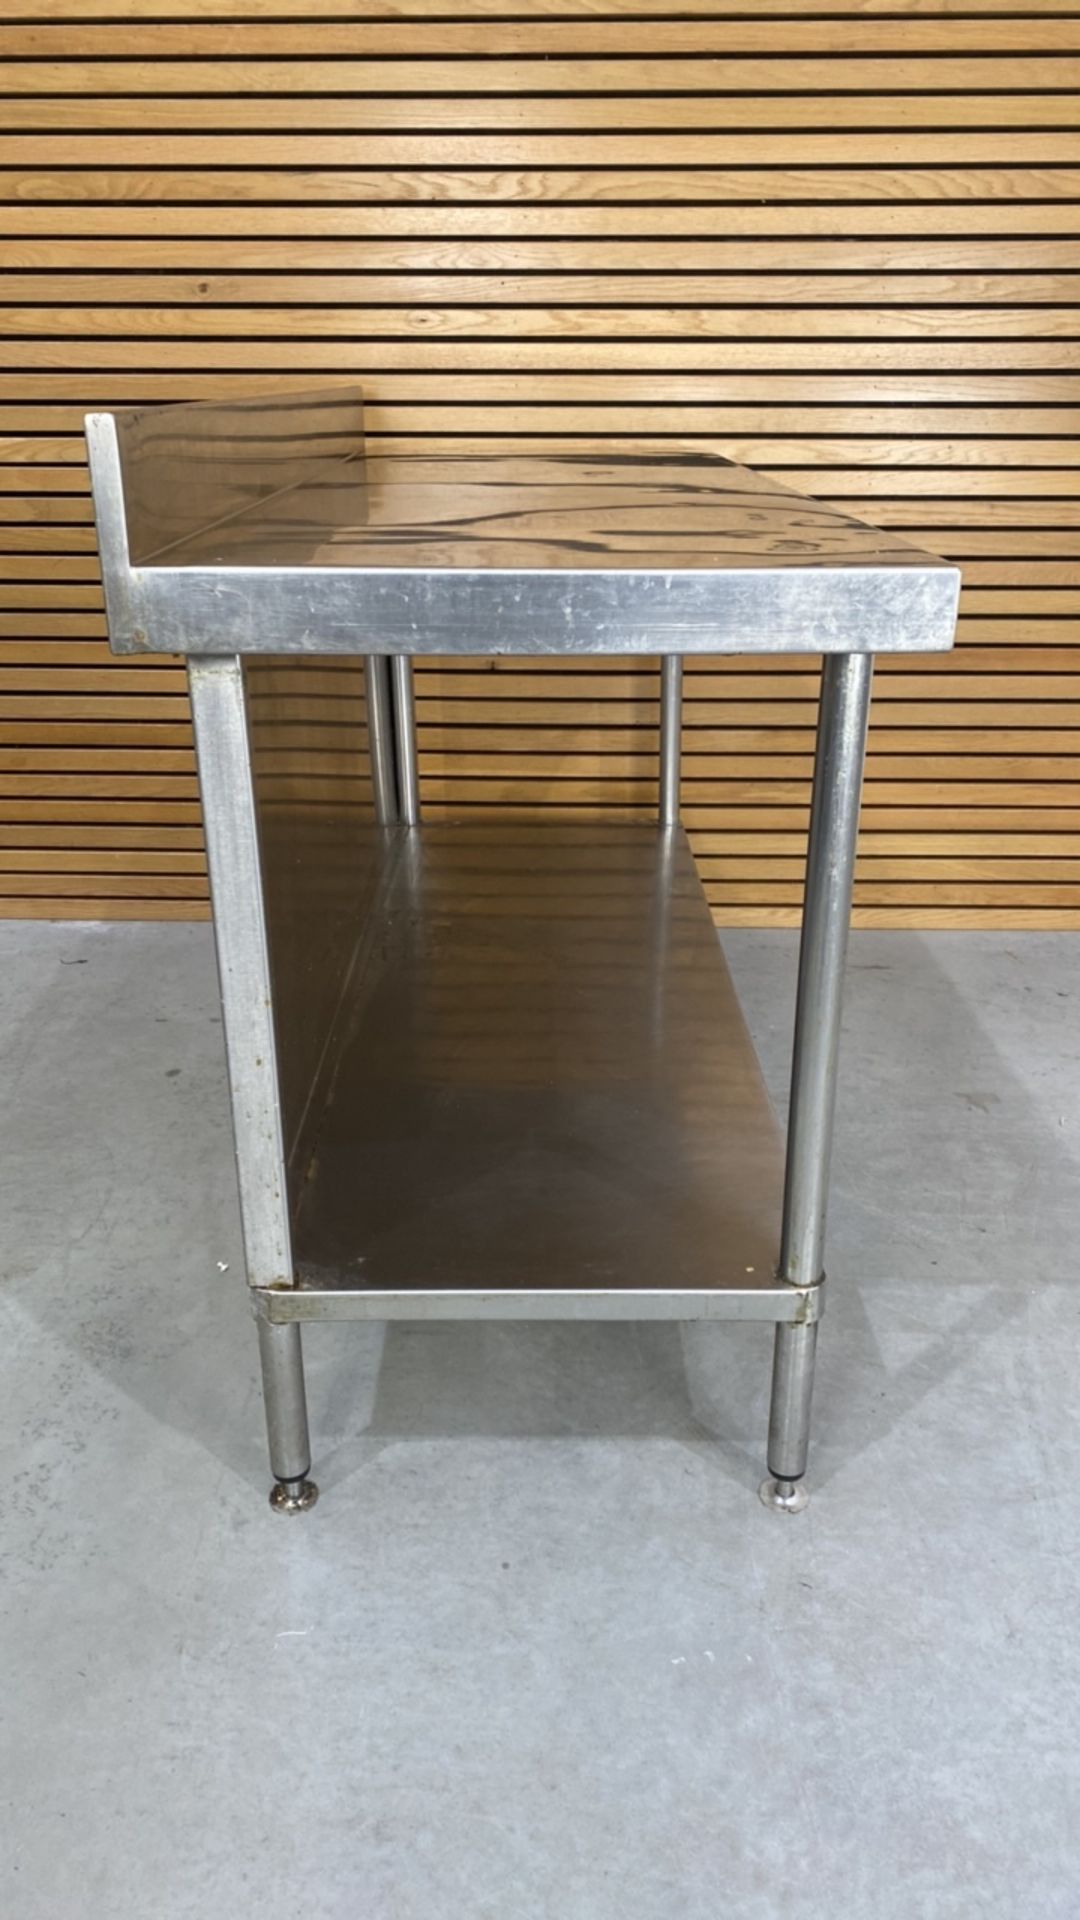 Simply Stainless Steel Preparation Table - Image 3 of 3